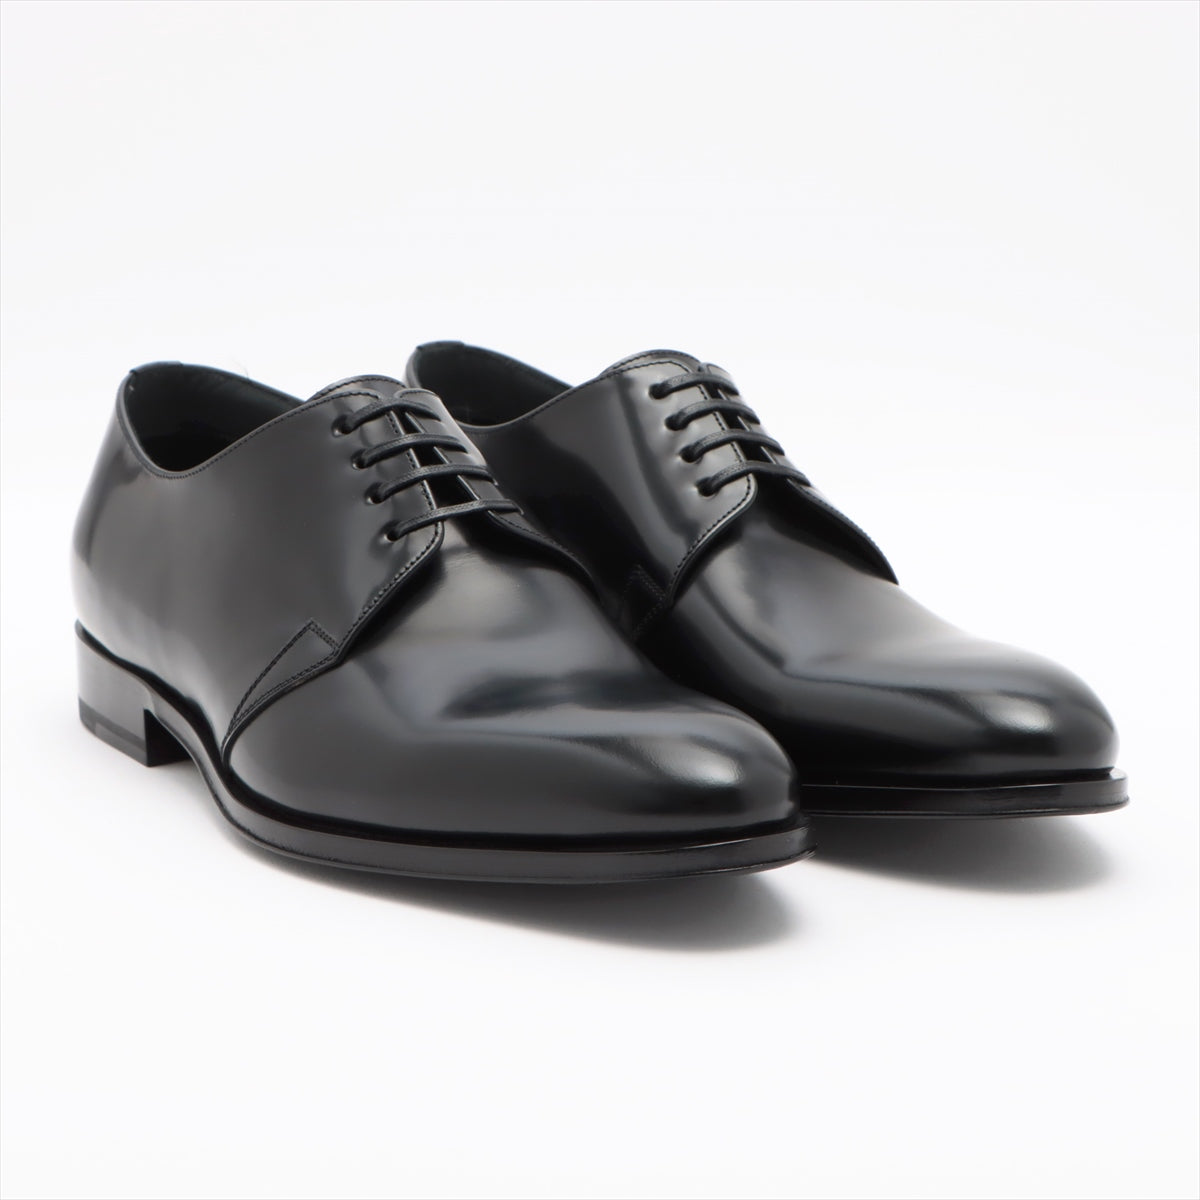 DIOR HOMME Leather Leather shoes 40 Men's Black box sack There is a replacement string